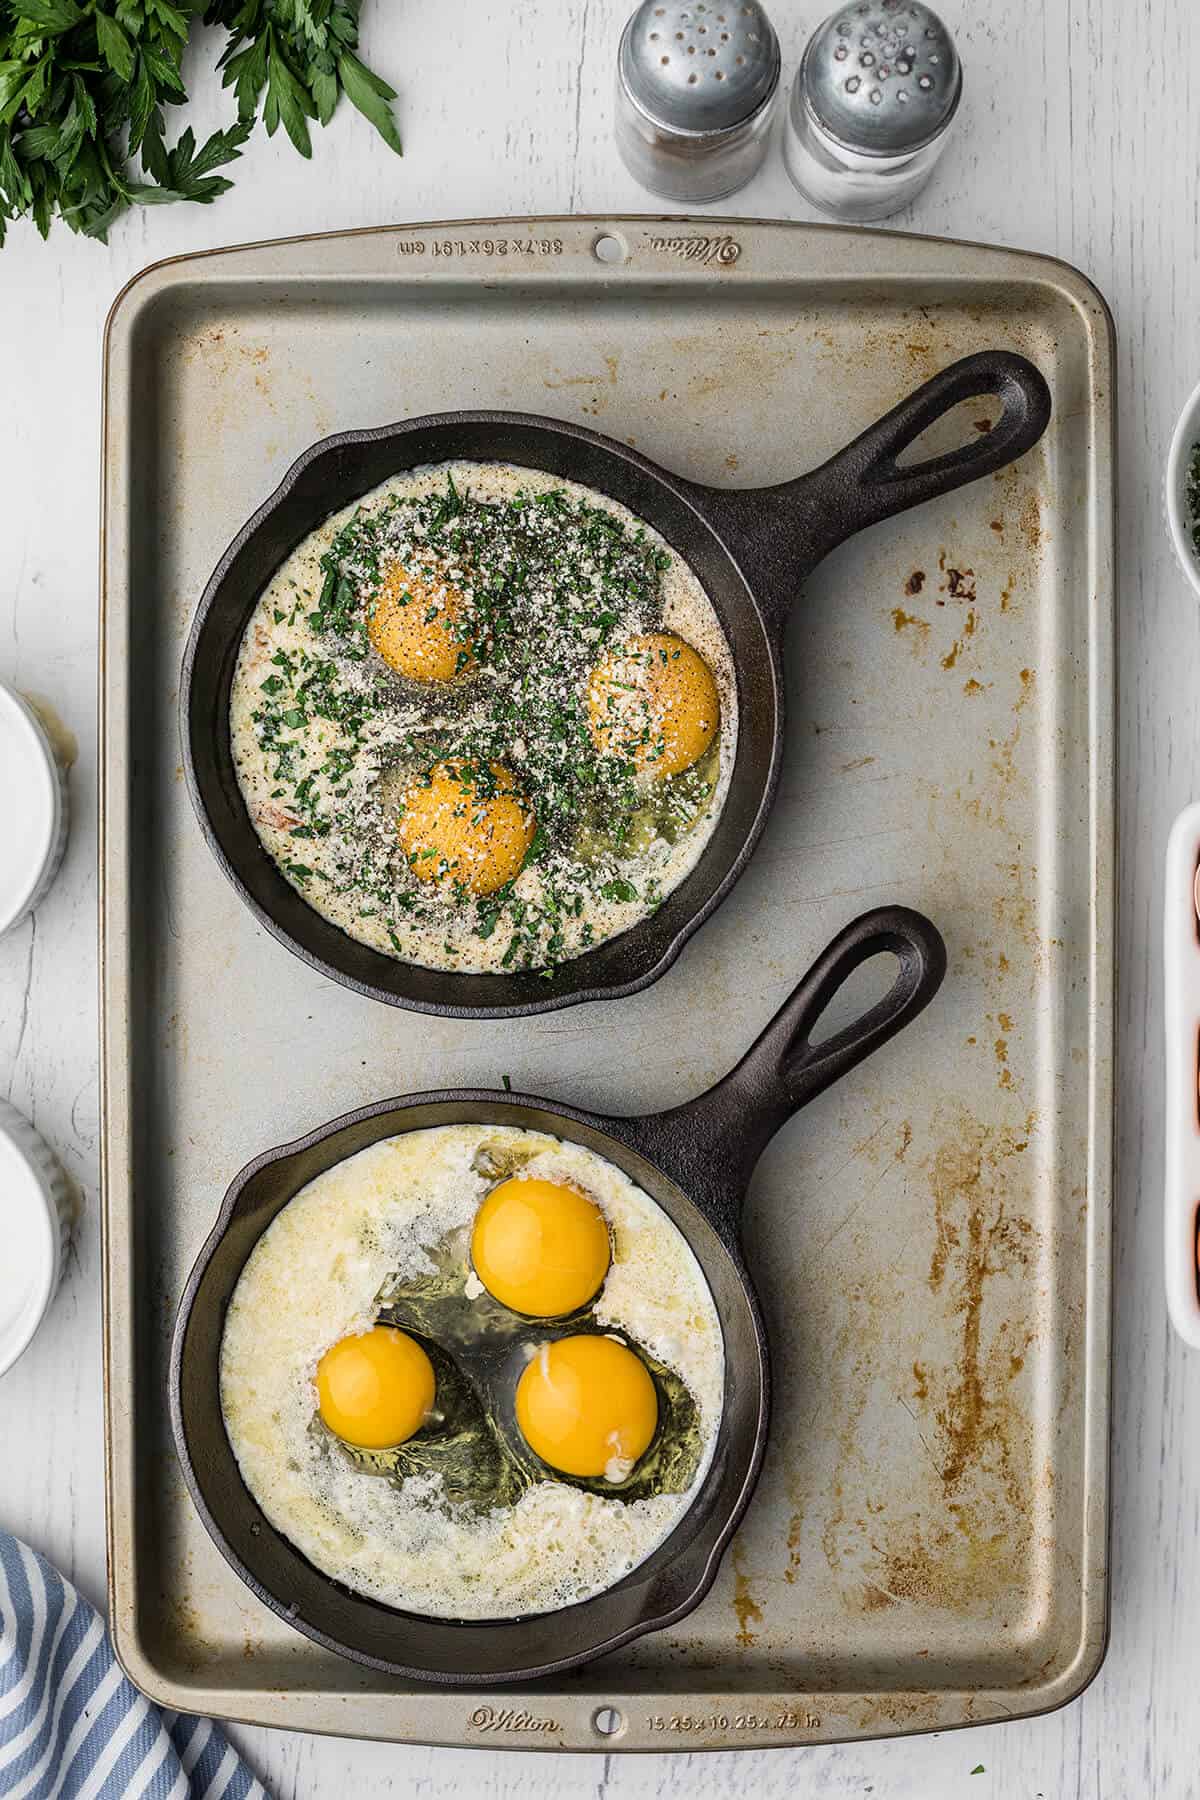 Eggs and herb mixture added to mini skillets.